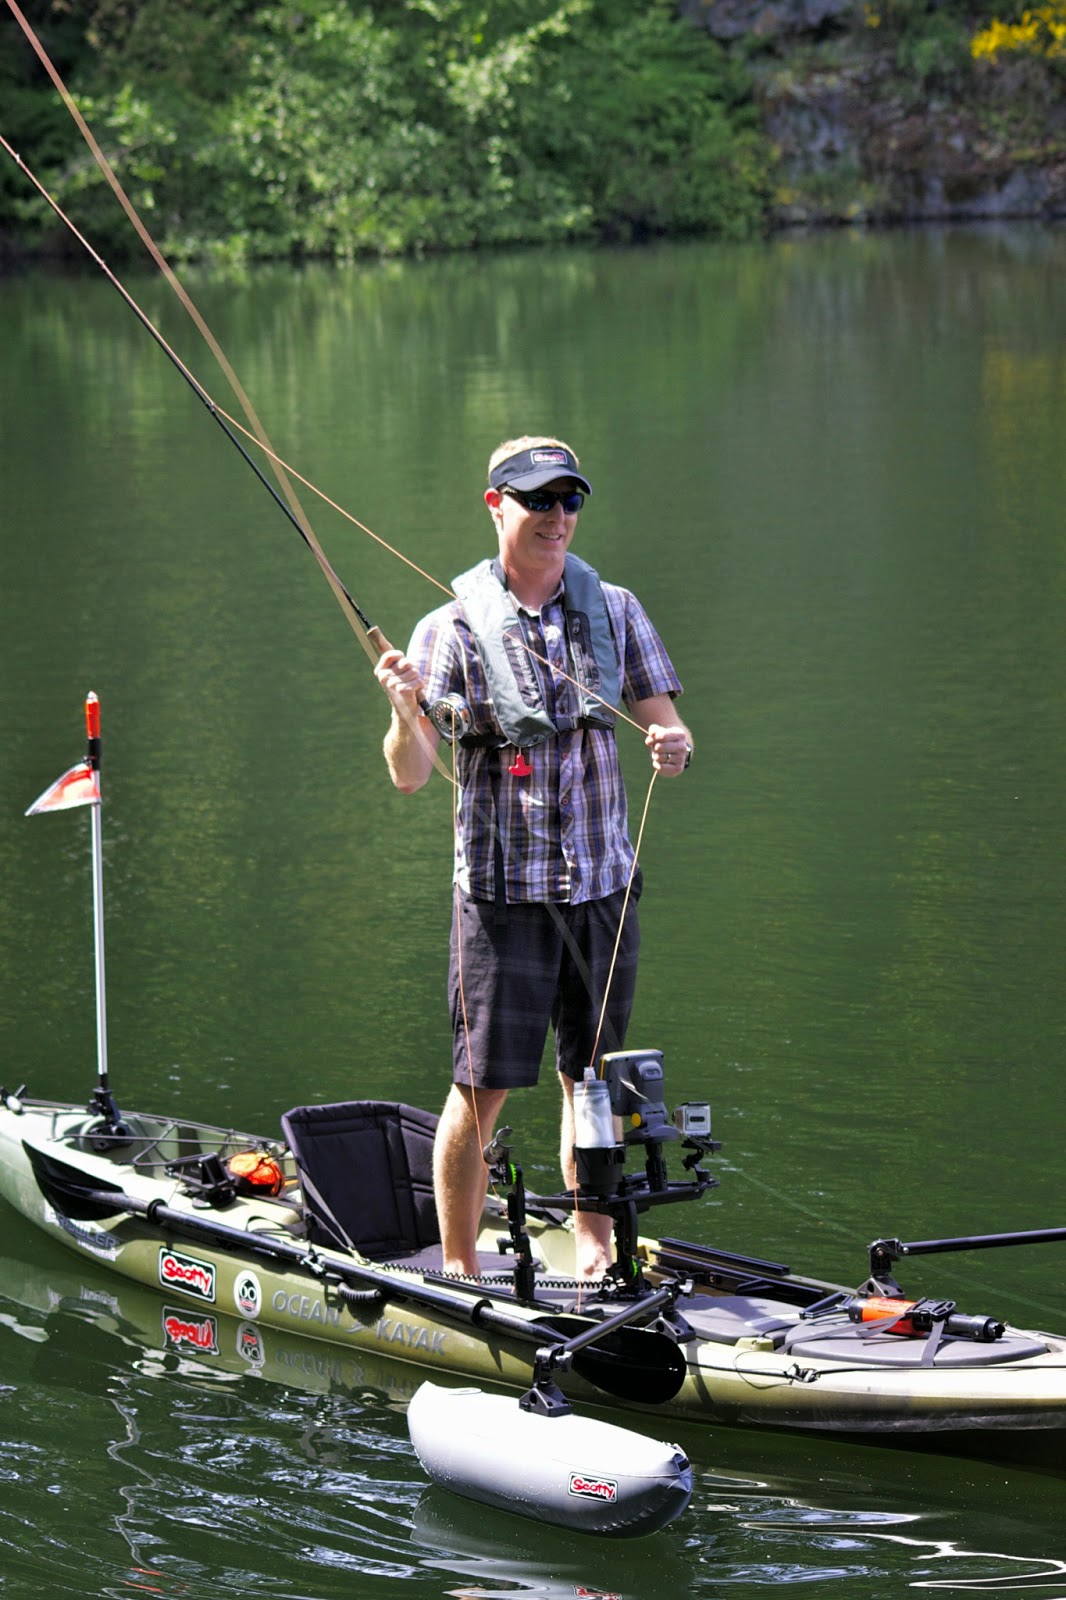 scotty fishing products: gear review: no. 302 scotty